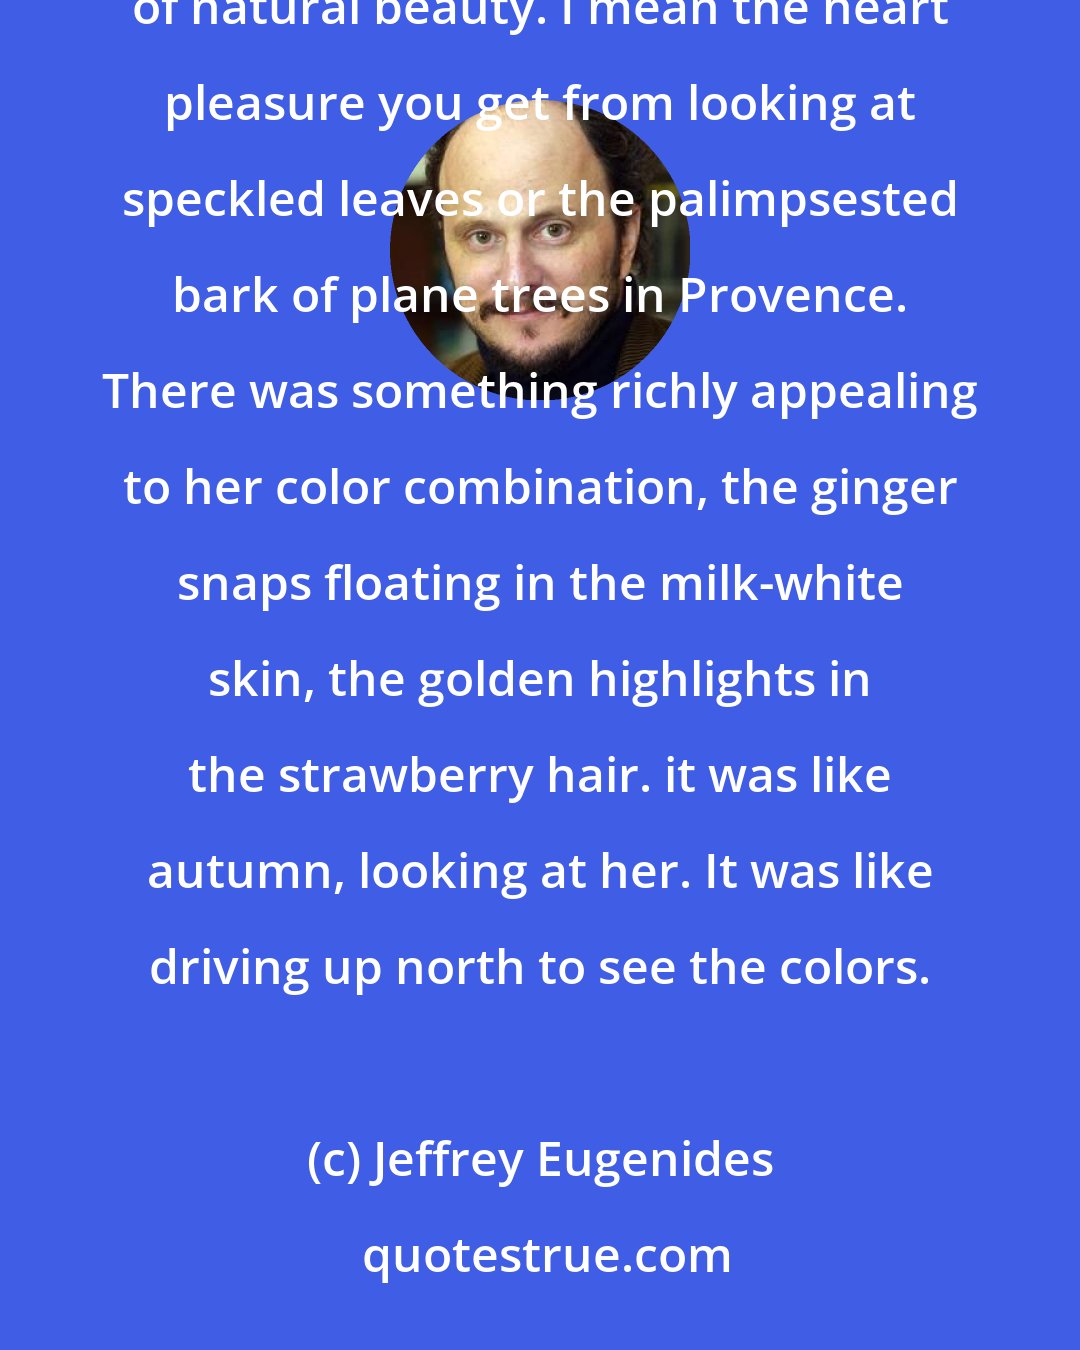 Jeffrey Eugenides: When I think back about my immediate reaction to that redheads girl, it seems to spring from an appreciation of natural beauty. I mean the heart pleasure you get from looking at speckled leaves or the palimpsested bark of plane trees in Provence. There was something richly appealing to her color combination, the ginger snaps floating in the milk-white skin, the golden highlights in the strawberry hair. it was like autumn, looking at her. It was like driving up north to see the colors.